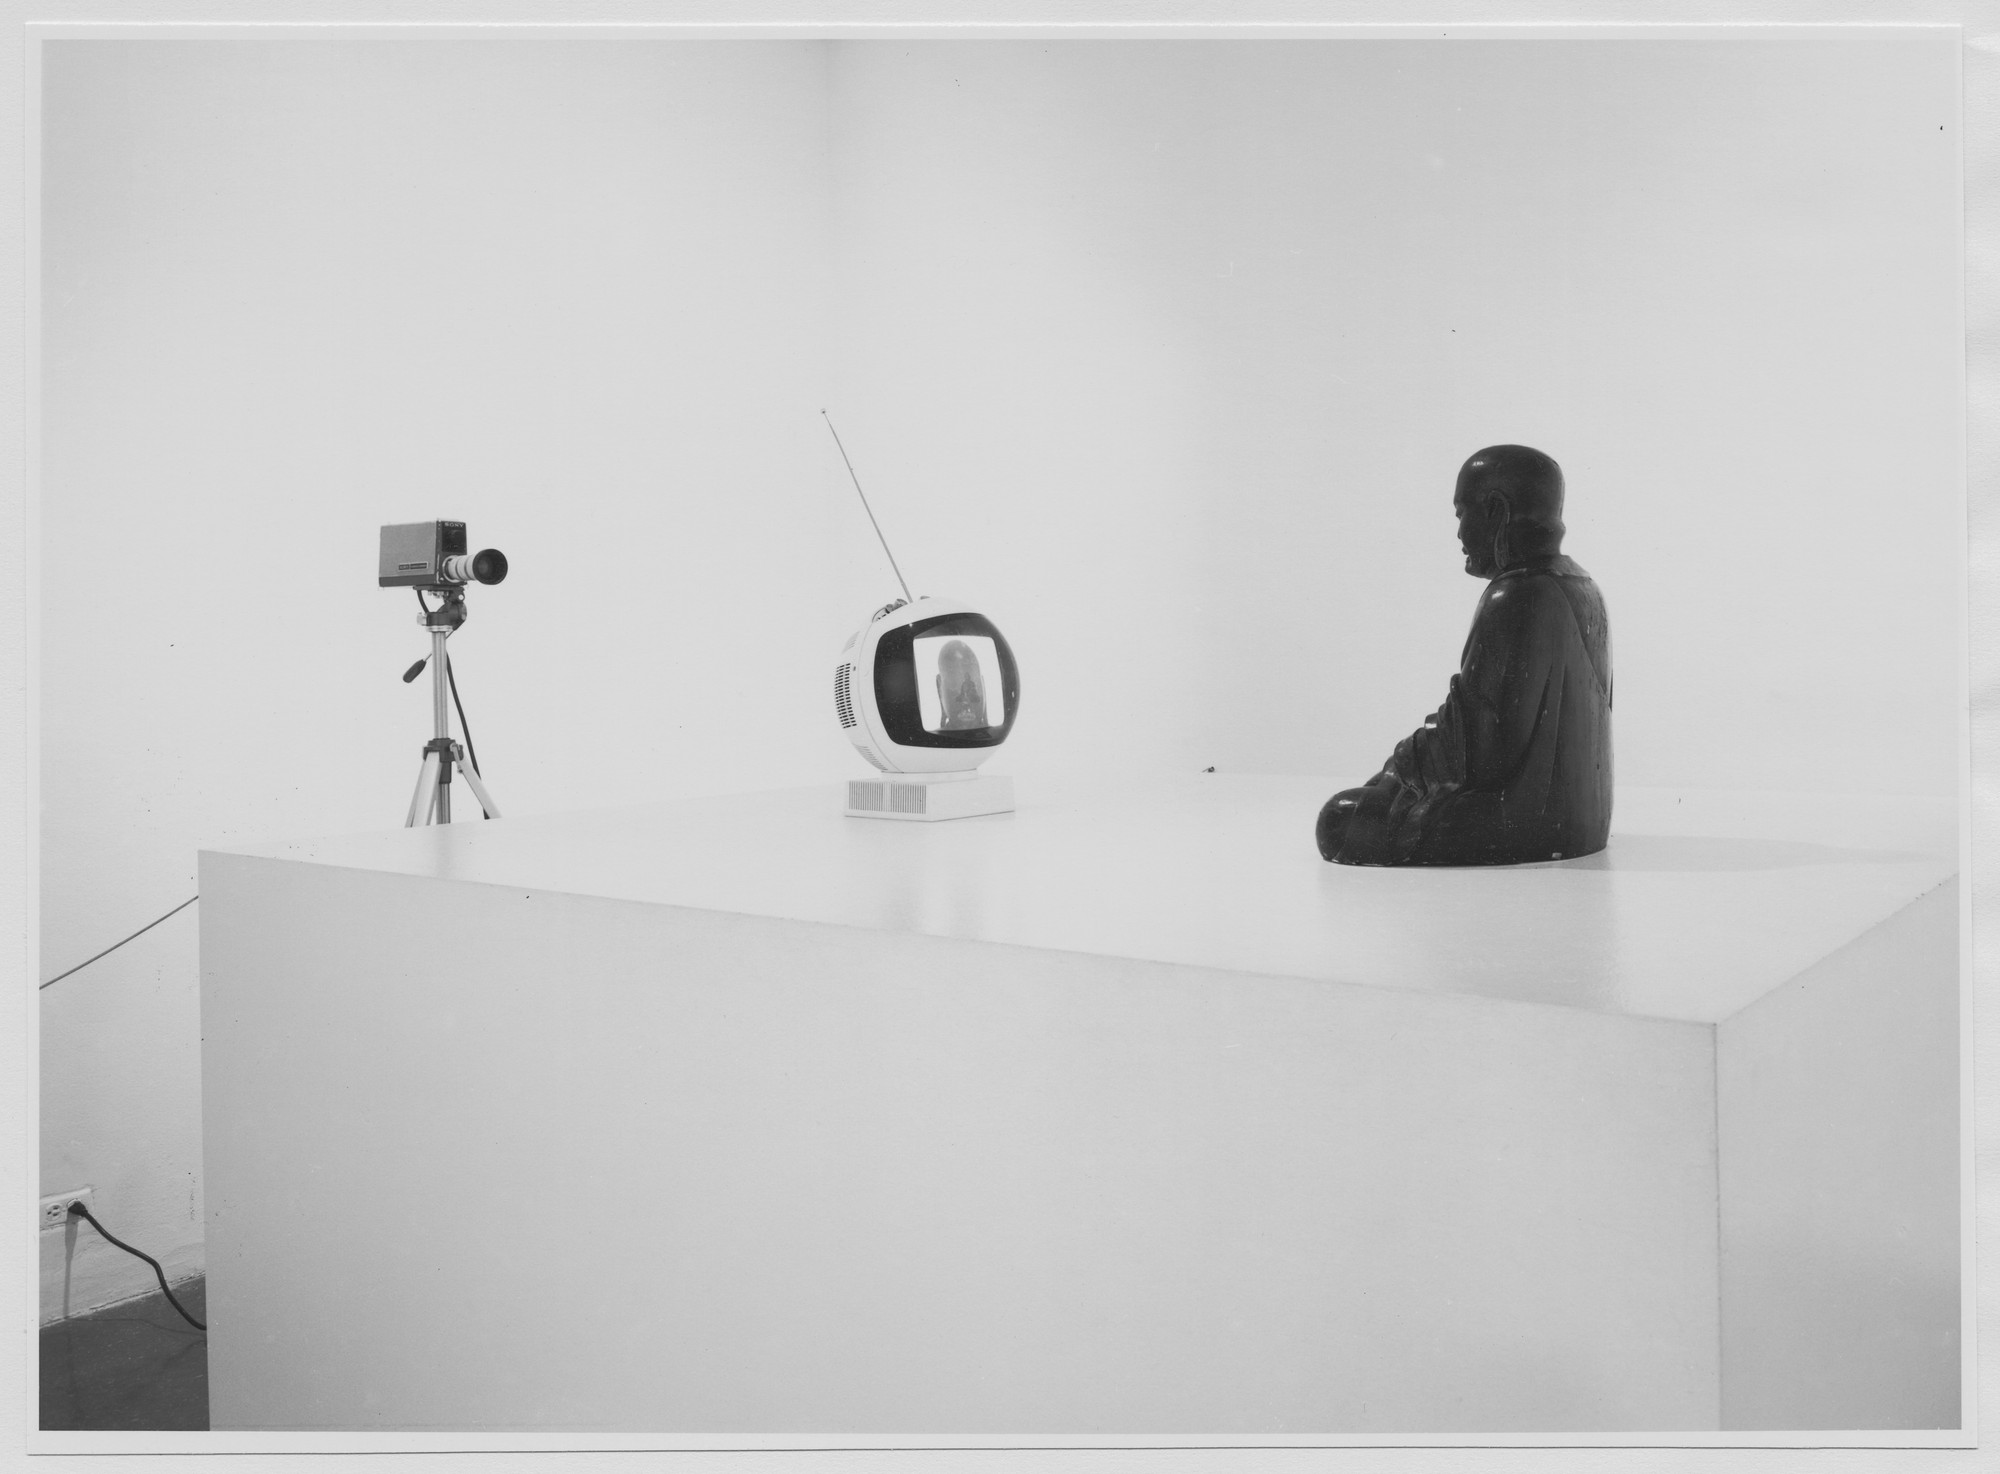 Installation view of the exhibition "Projects Nam June Paik." MoMA